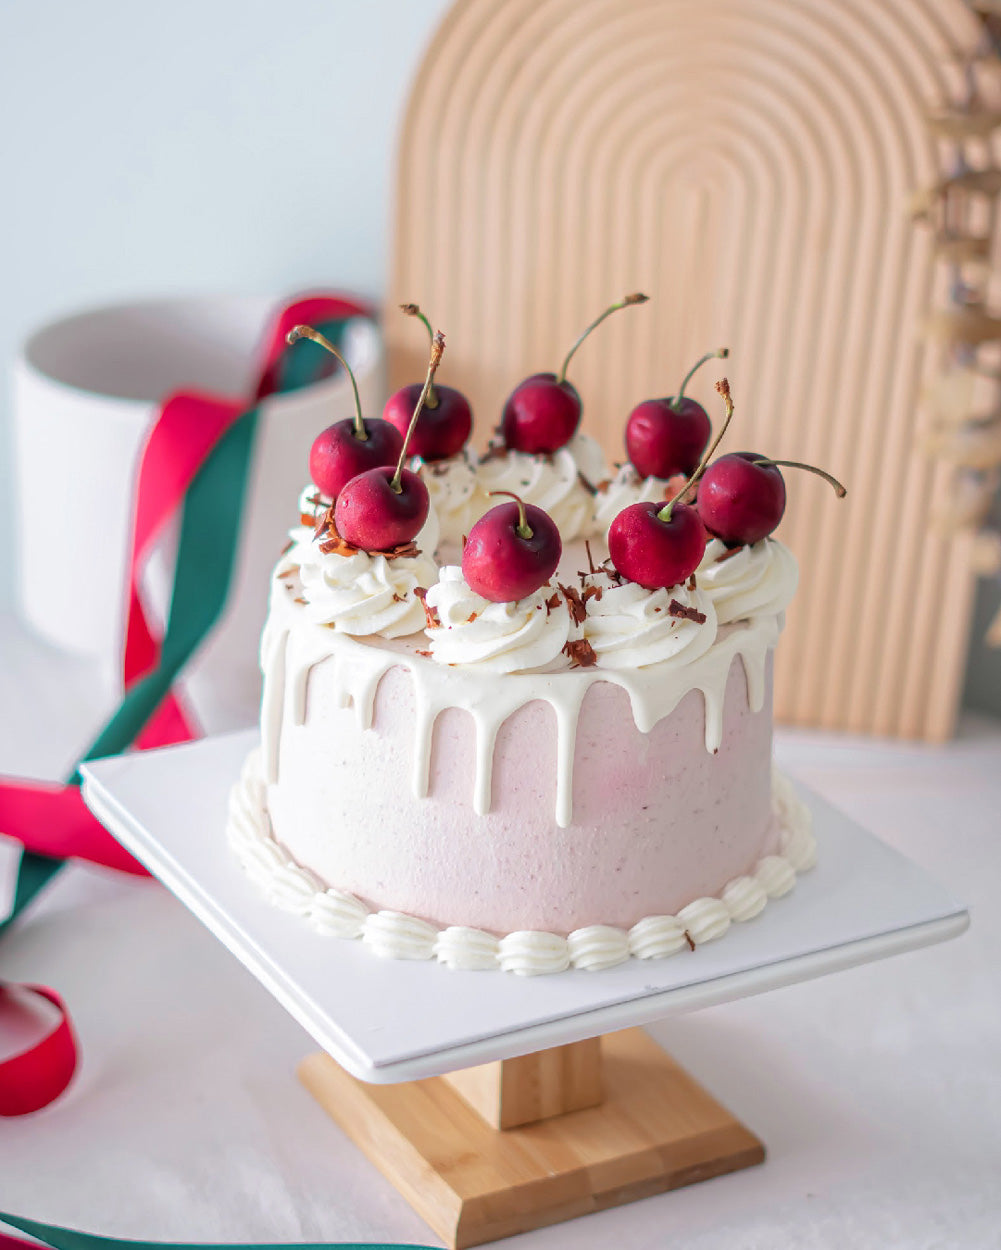 Black Forest Cake decorated with real cherries